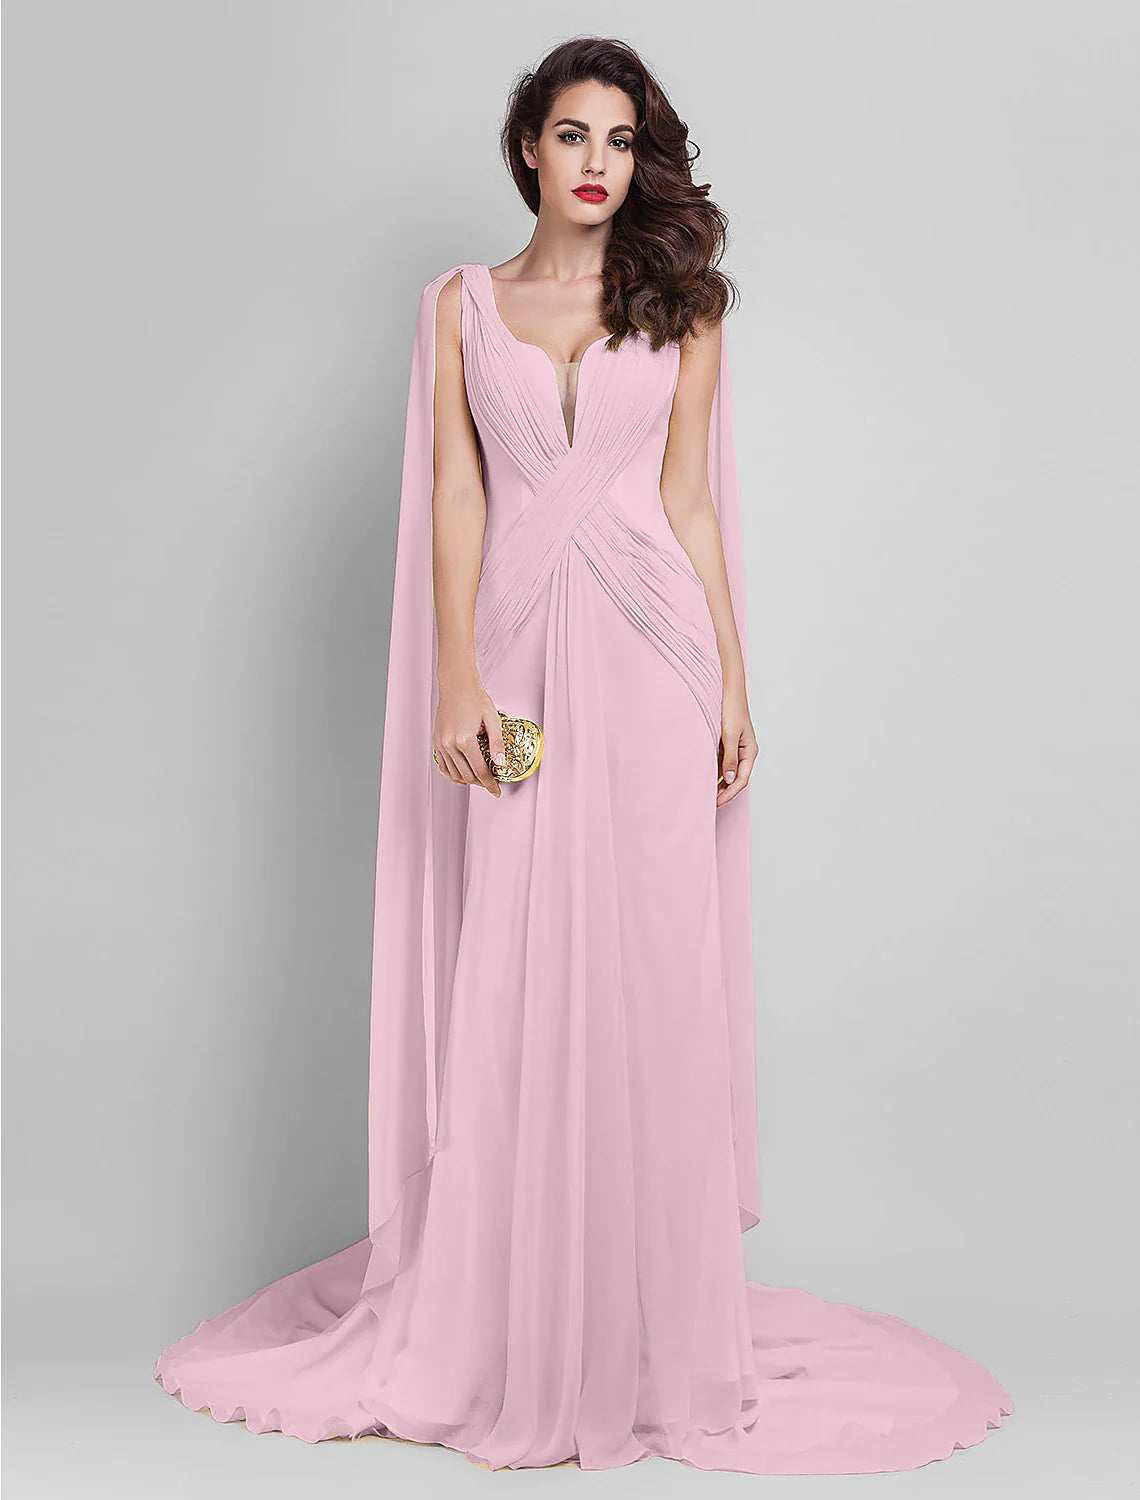 Sheath / Column Elegant Dress Wedding Guest Prom Court Train Sleeveless Plunging Neck Georgette V Back with Criss Cross Side Draping